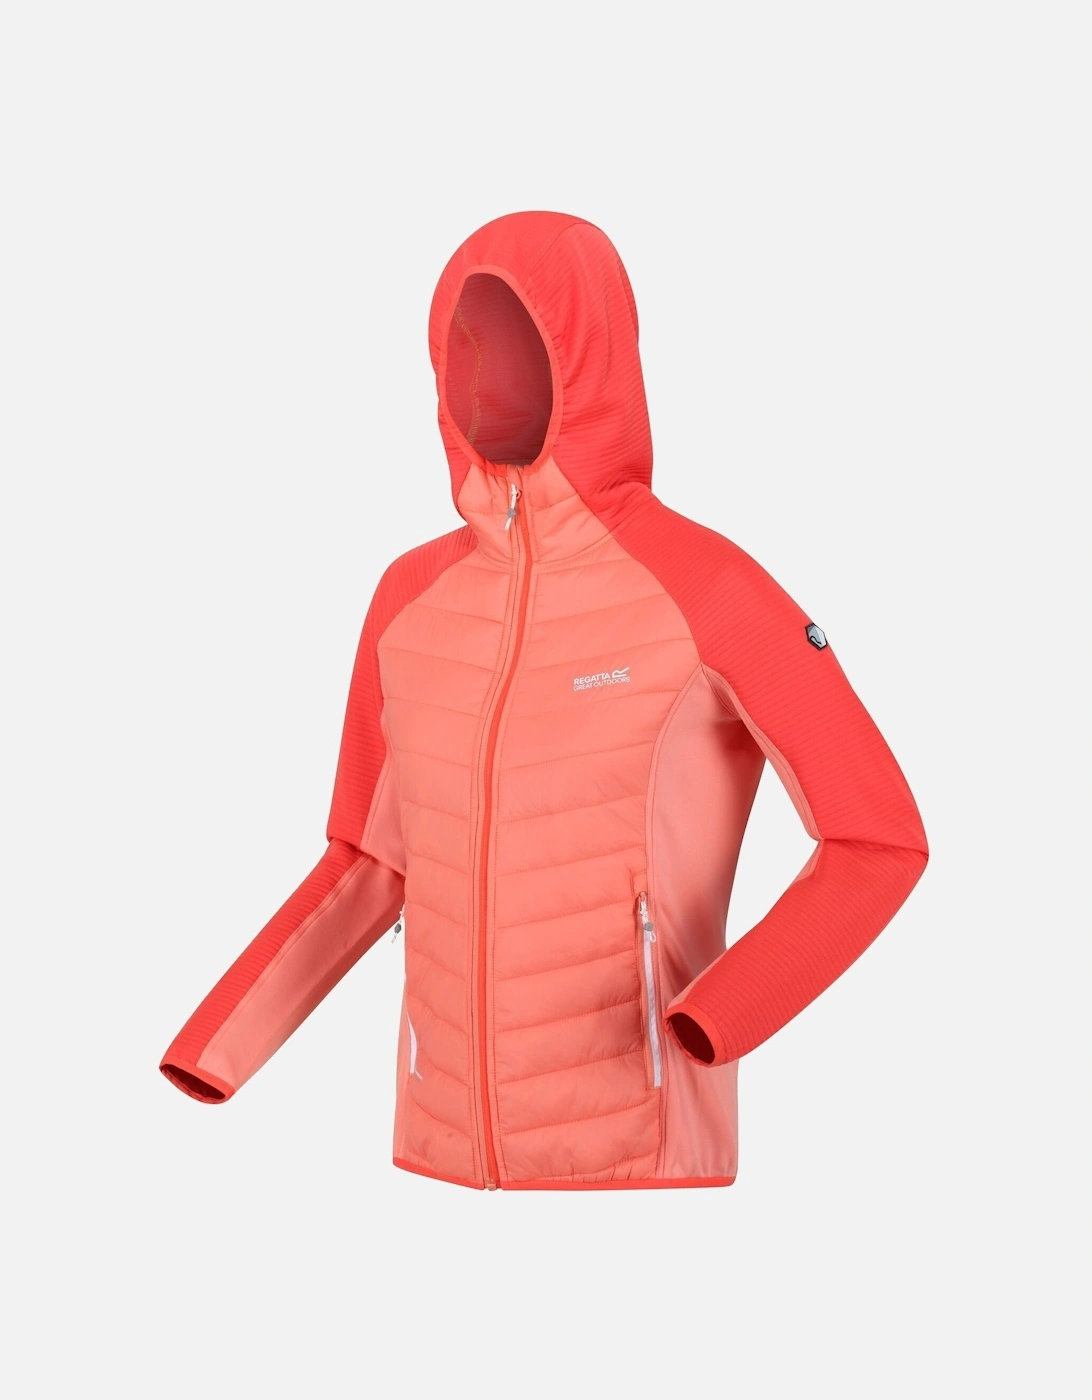 Womens/Ladies Andreson VI Insulated Jacket